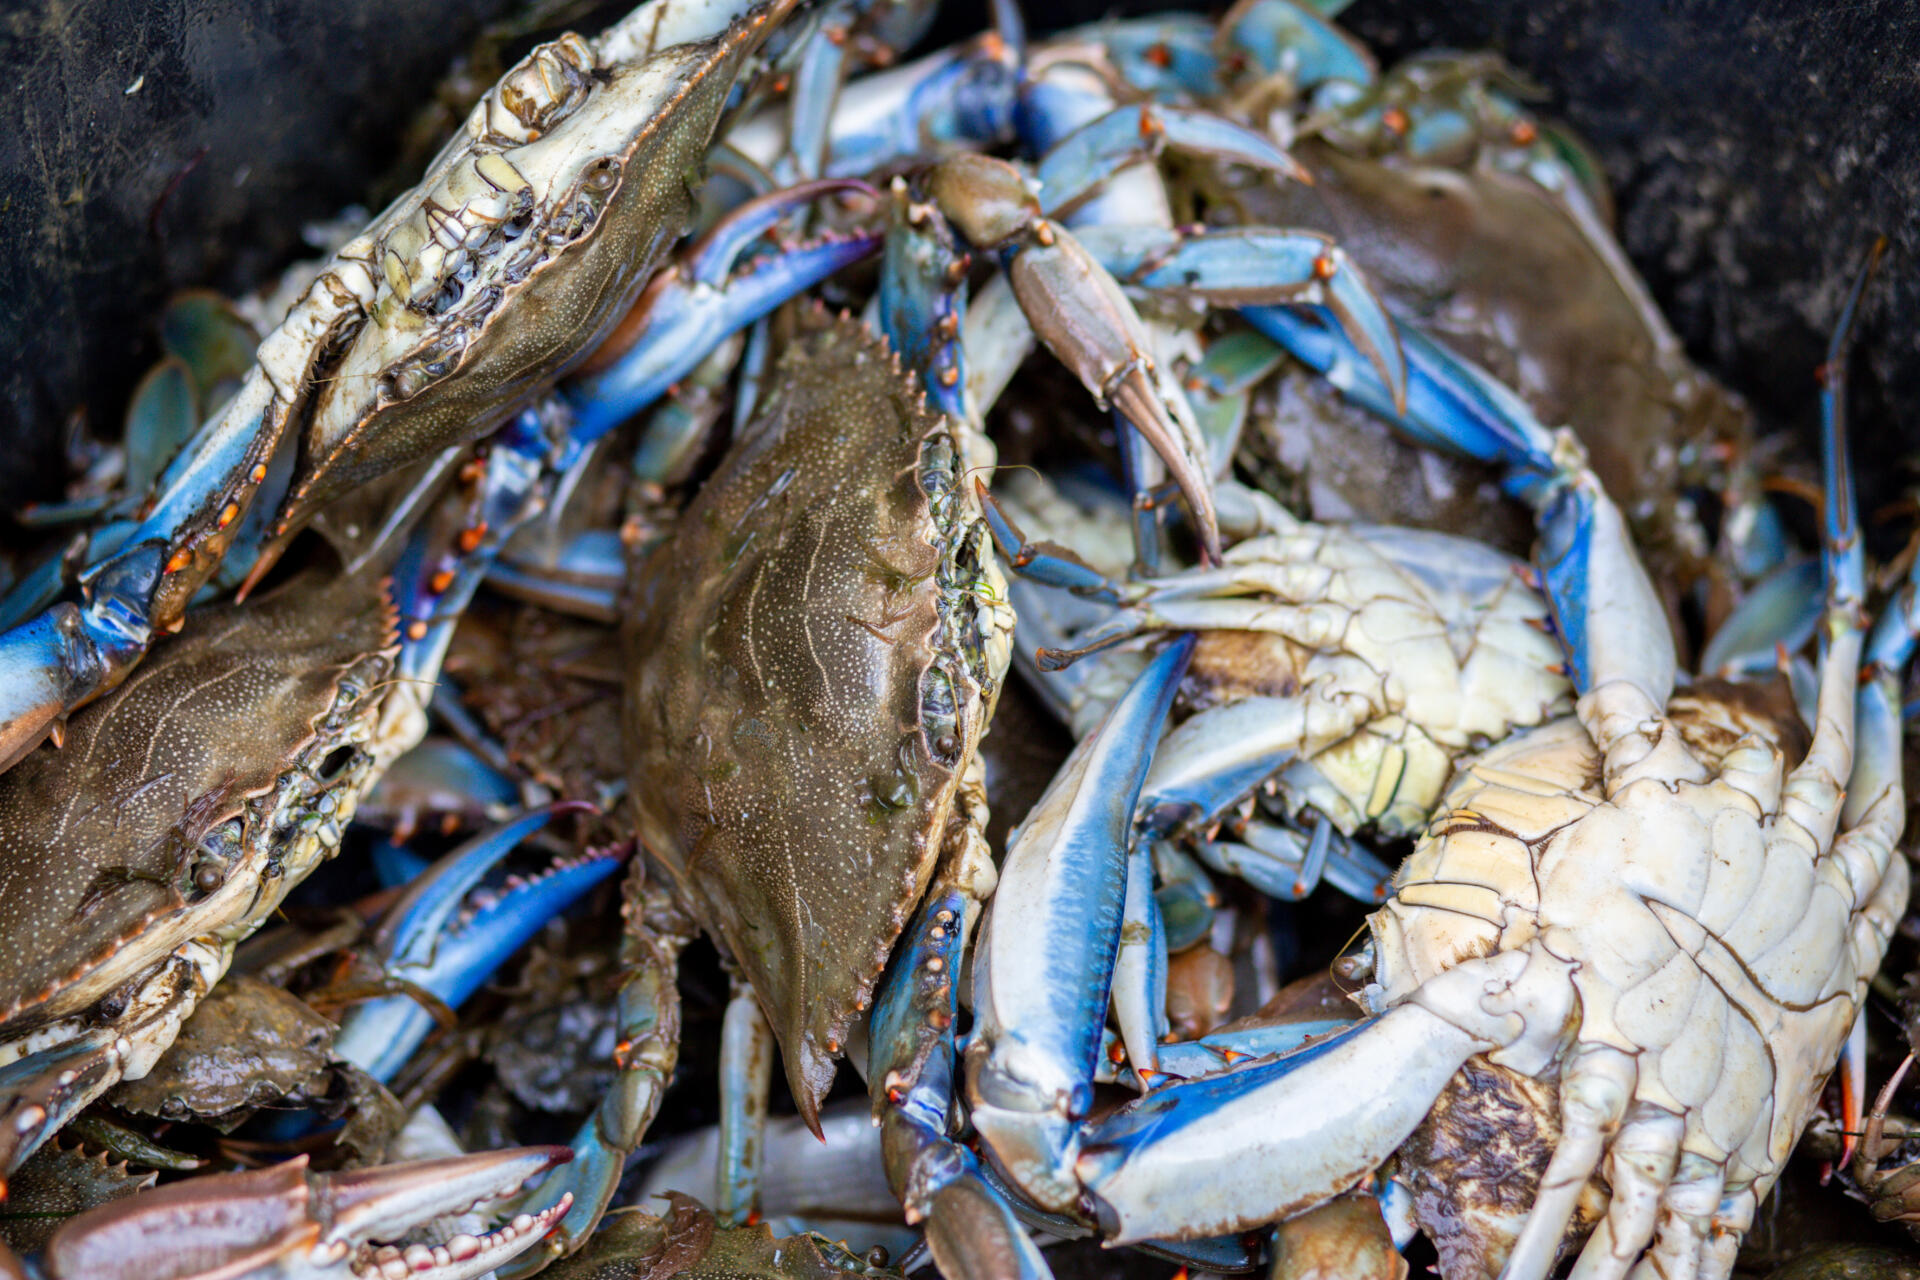 Blue crabs collected by Jean-Claude Pons.  Caen-en-Roussillon, Pyrenees-Orientales, September 8, 2022.